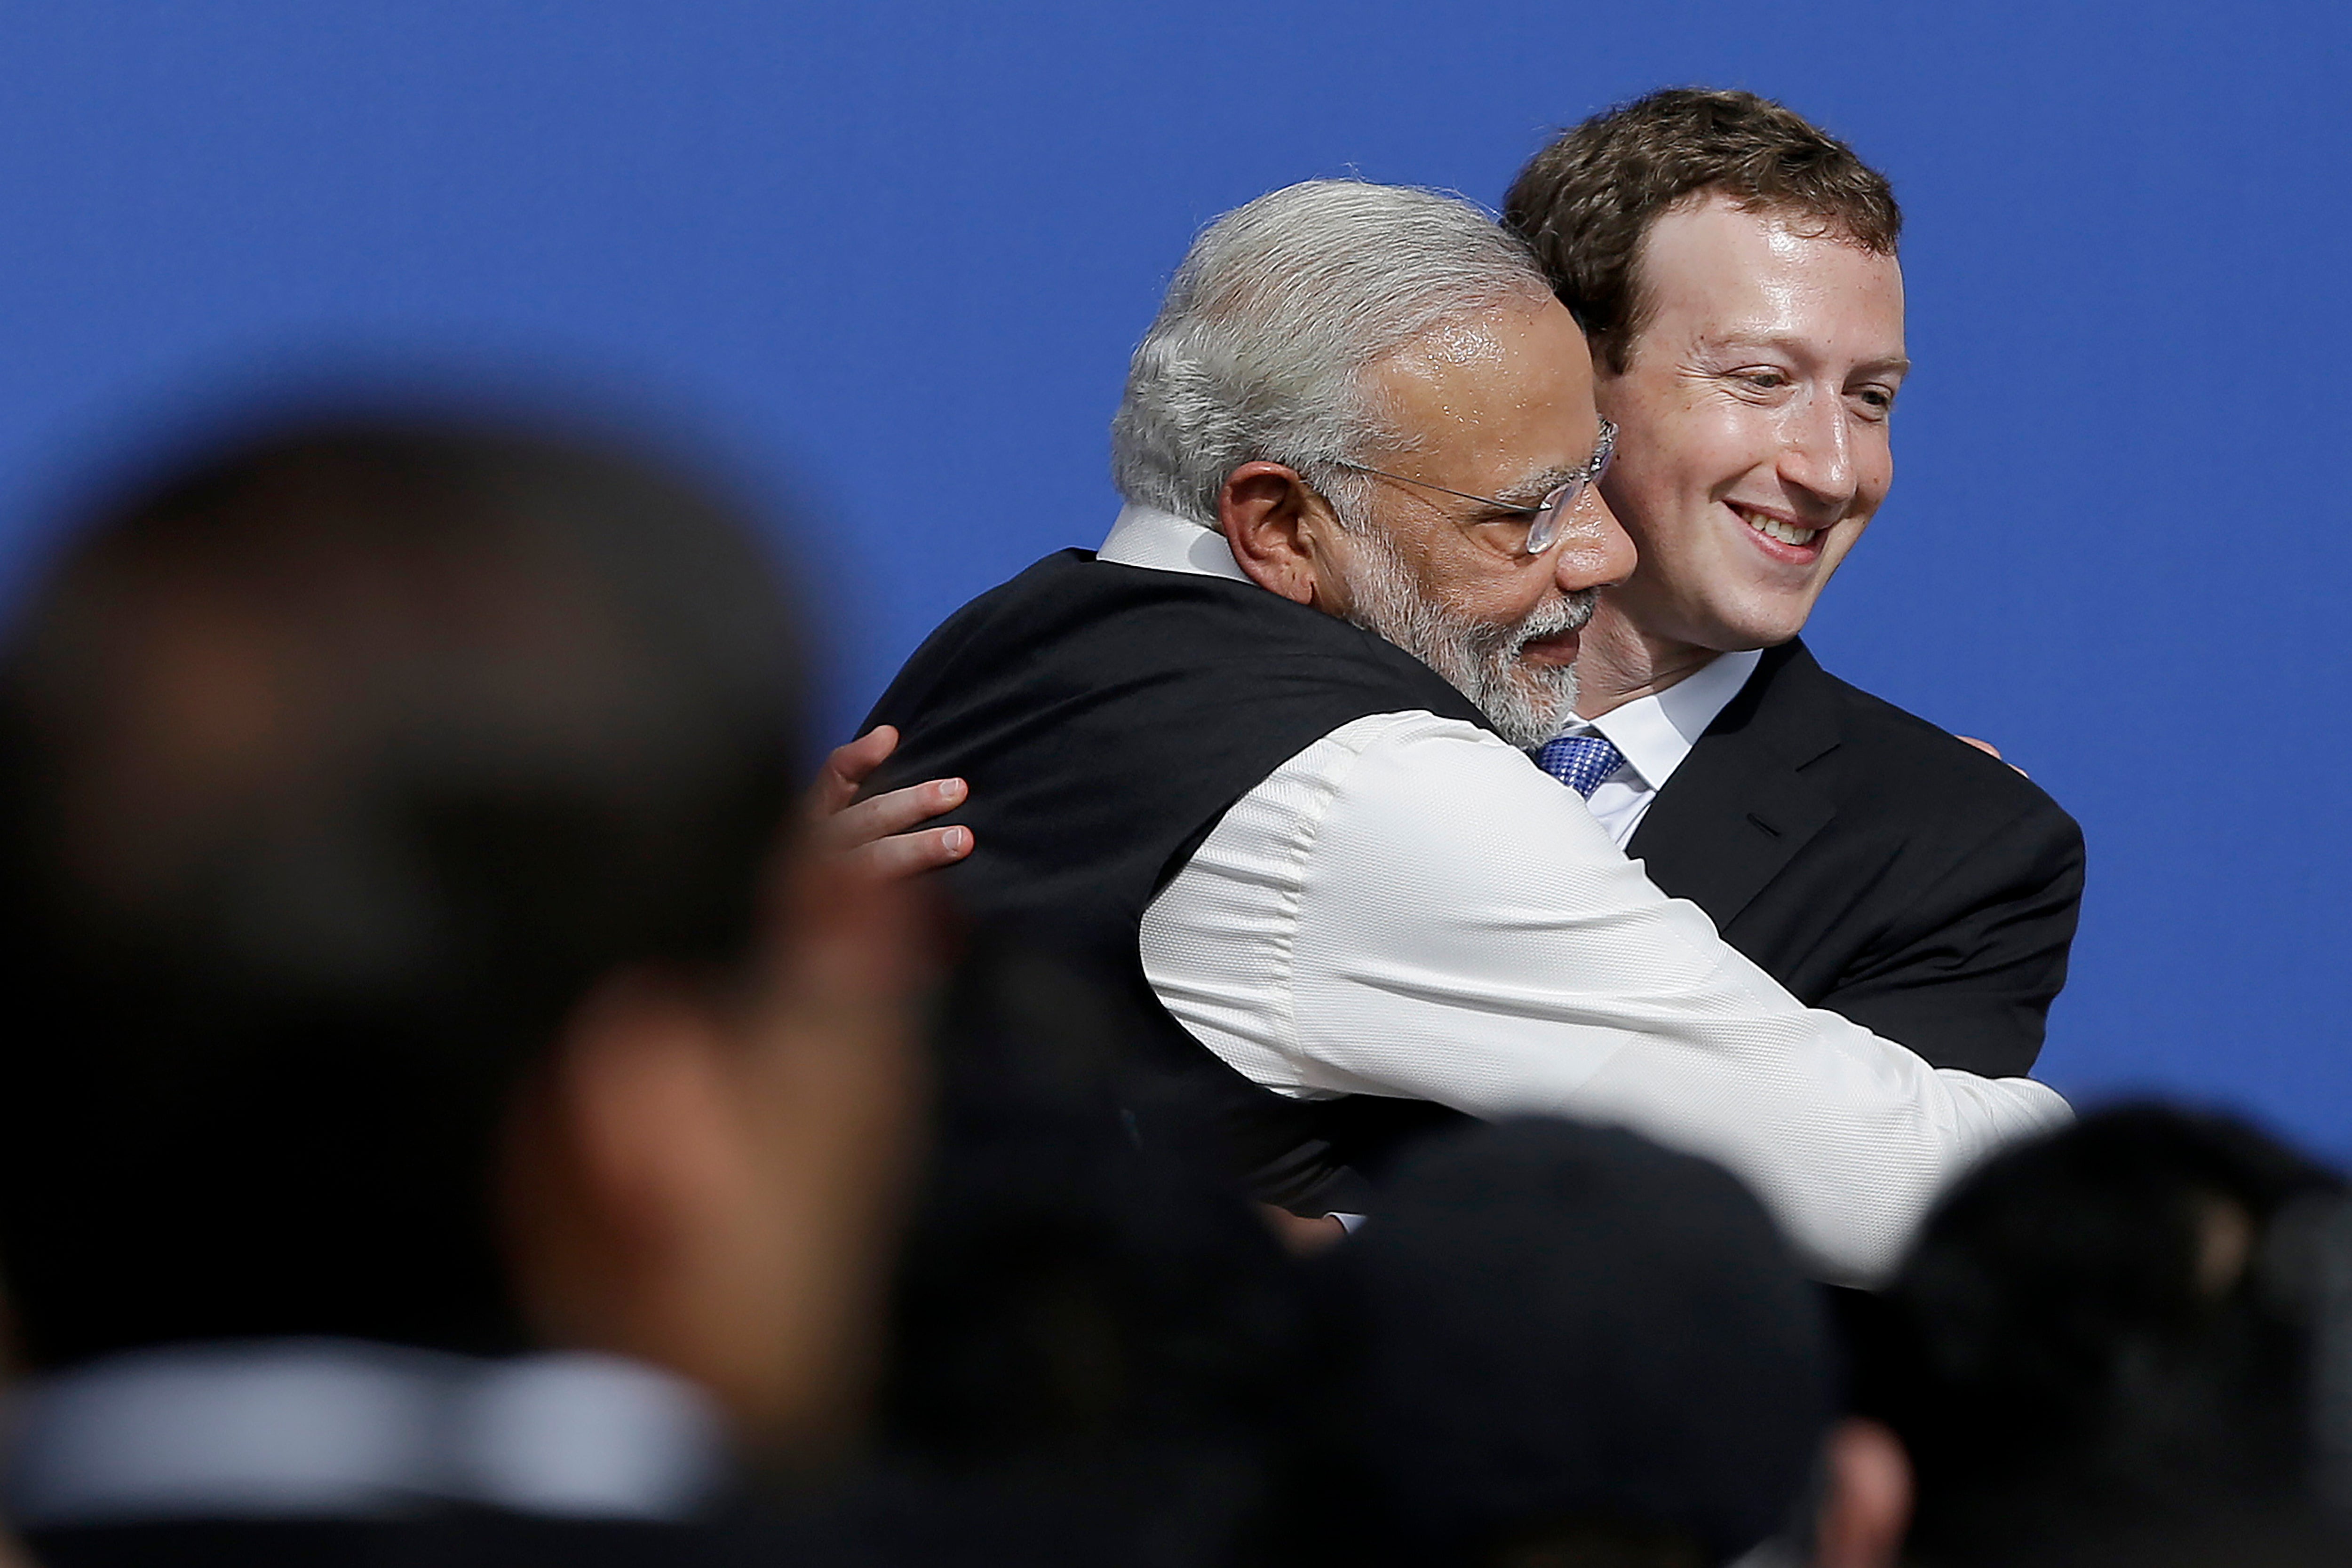 File photo: Facebook has been repeatedly accused of several wrongdoings in the past, including favouring BJP